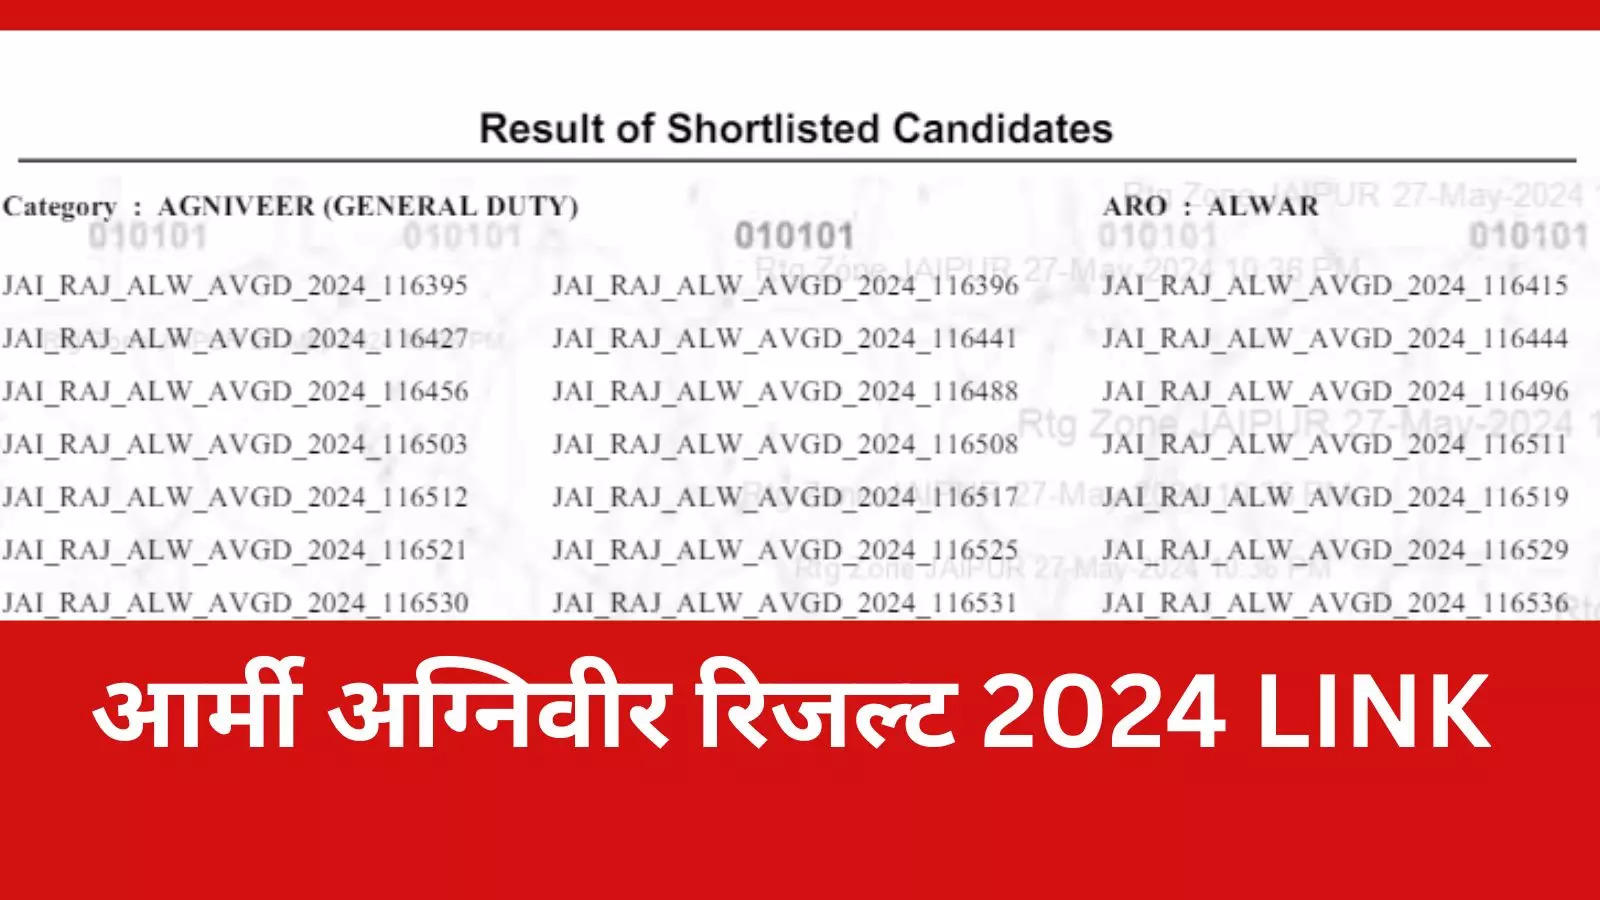 Army Agniveer Result 2024: Army Agniveer CEE result released, here is joinindianarmy nic direct link to check.